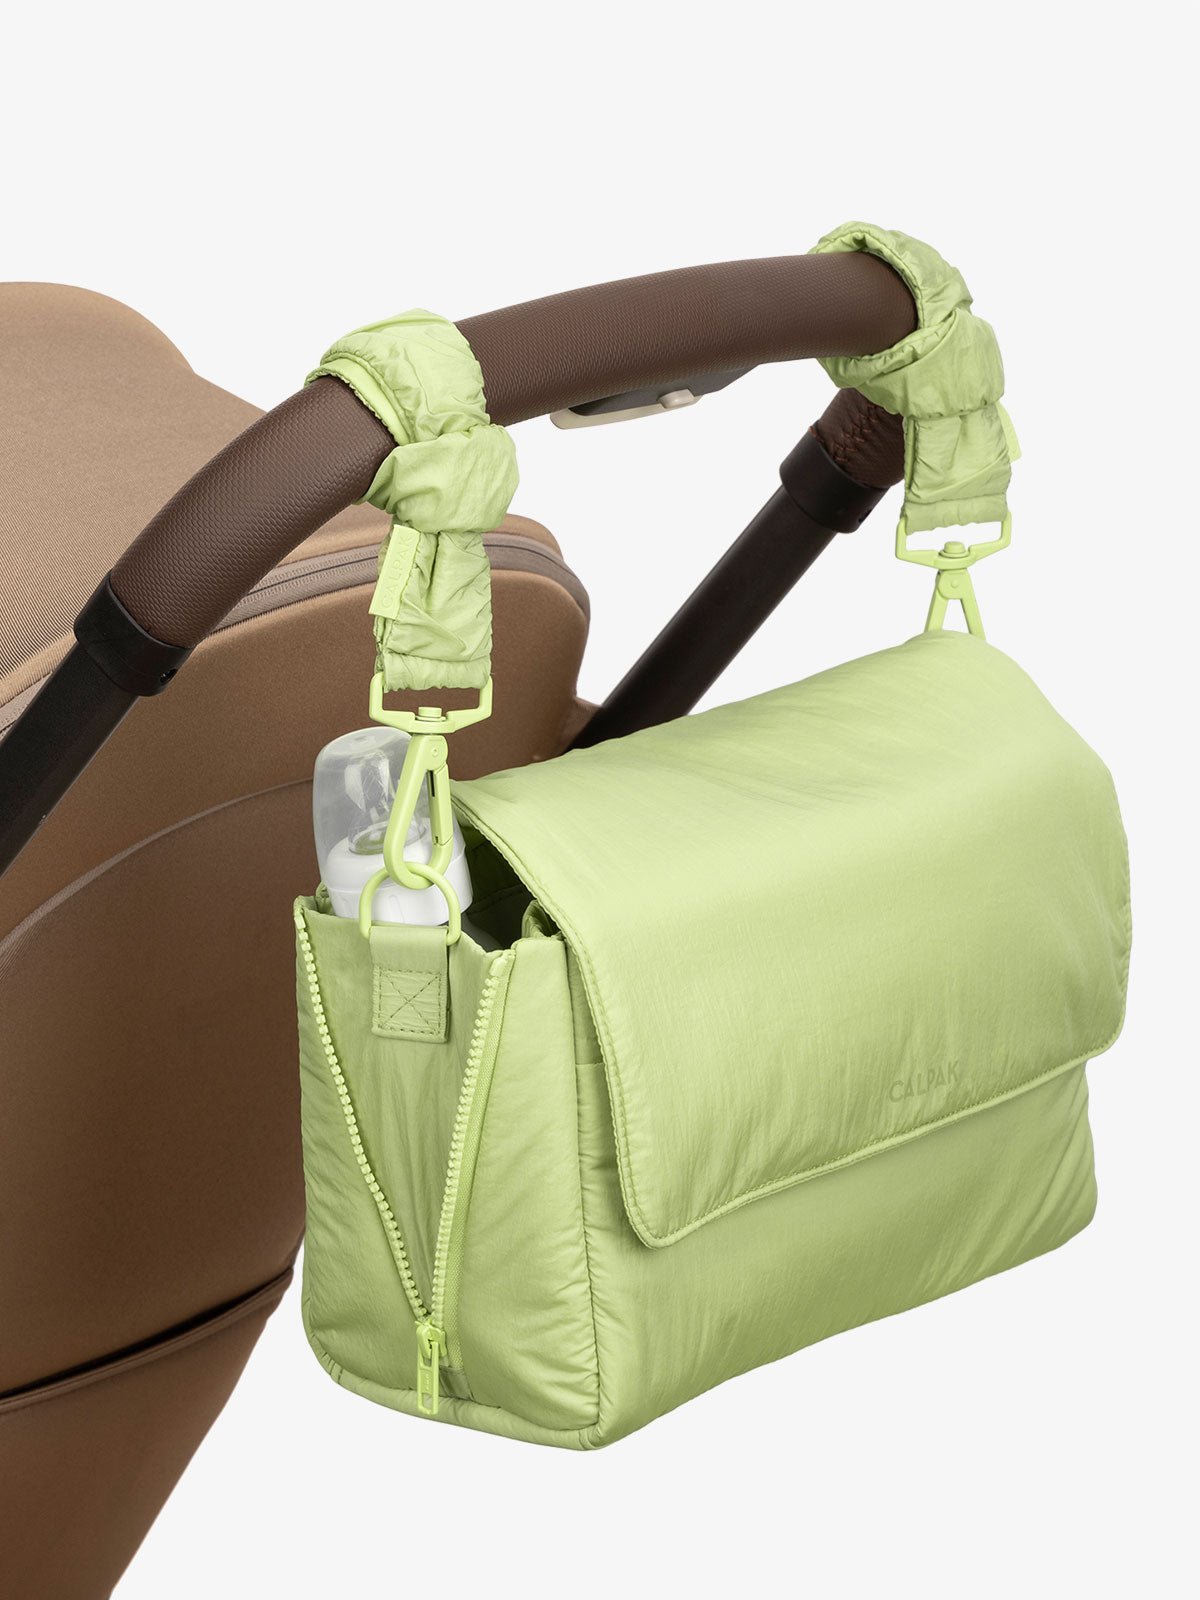 CALPAK Convertible Stroller Caddy Crossbody with included stroller straps in lime green